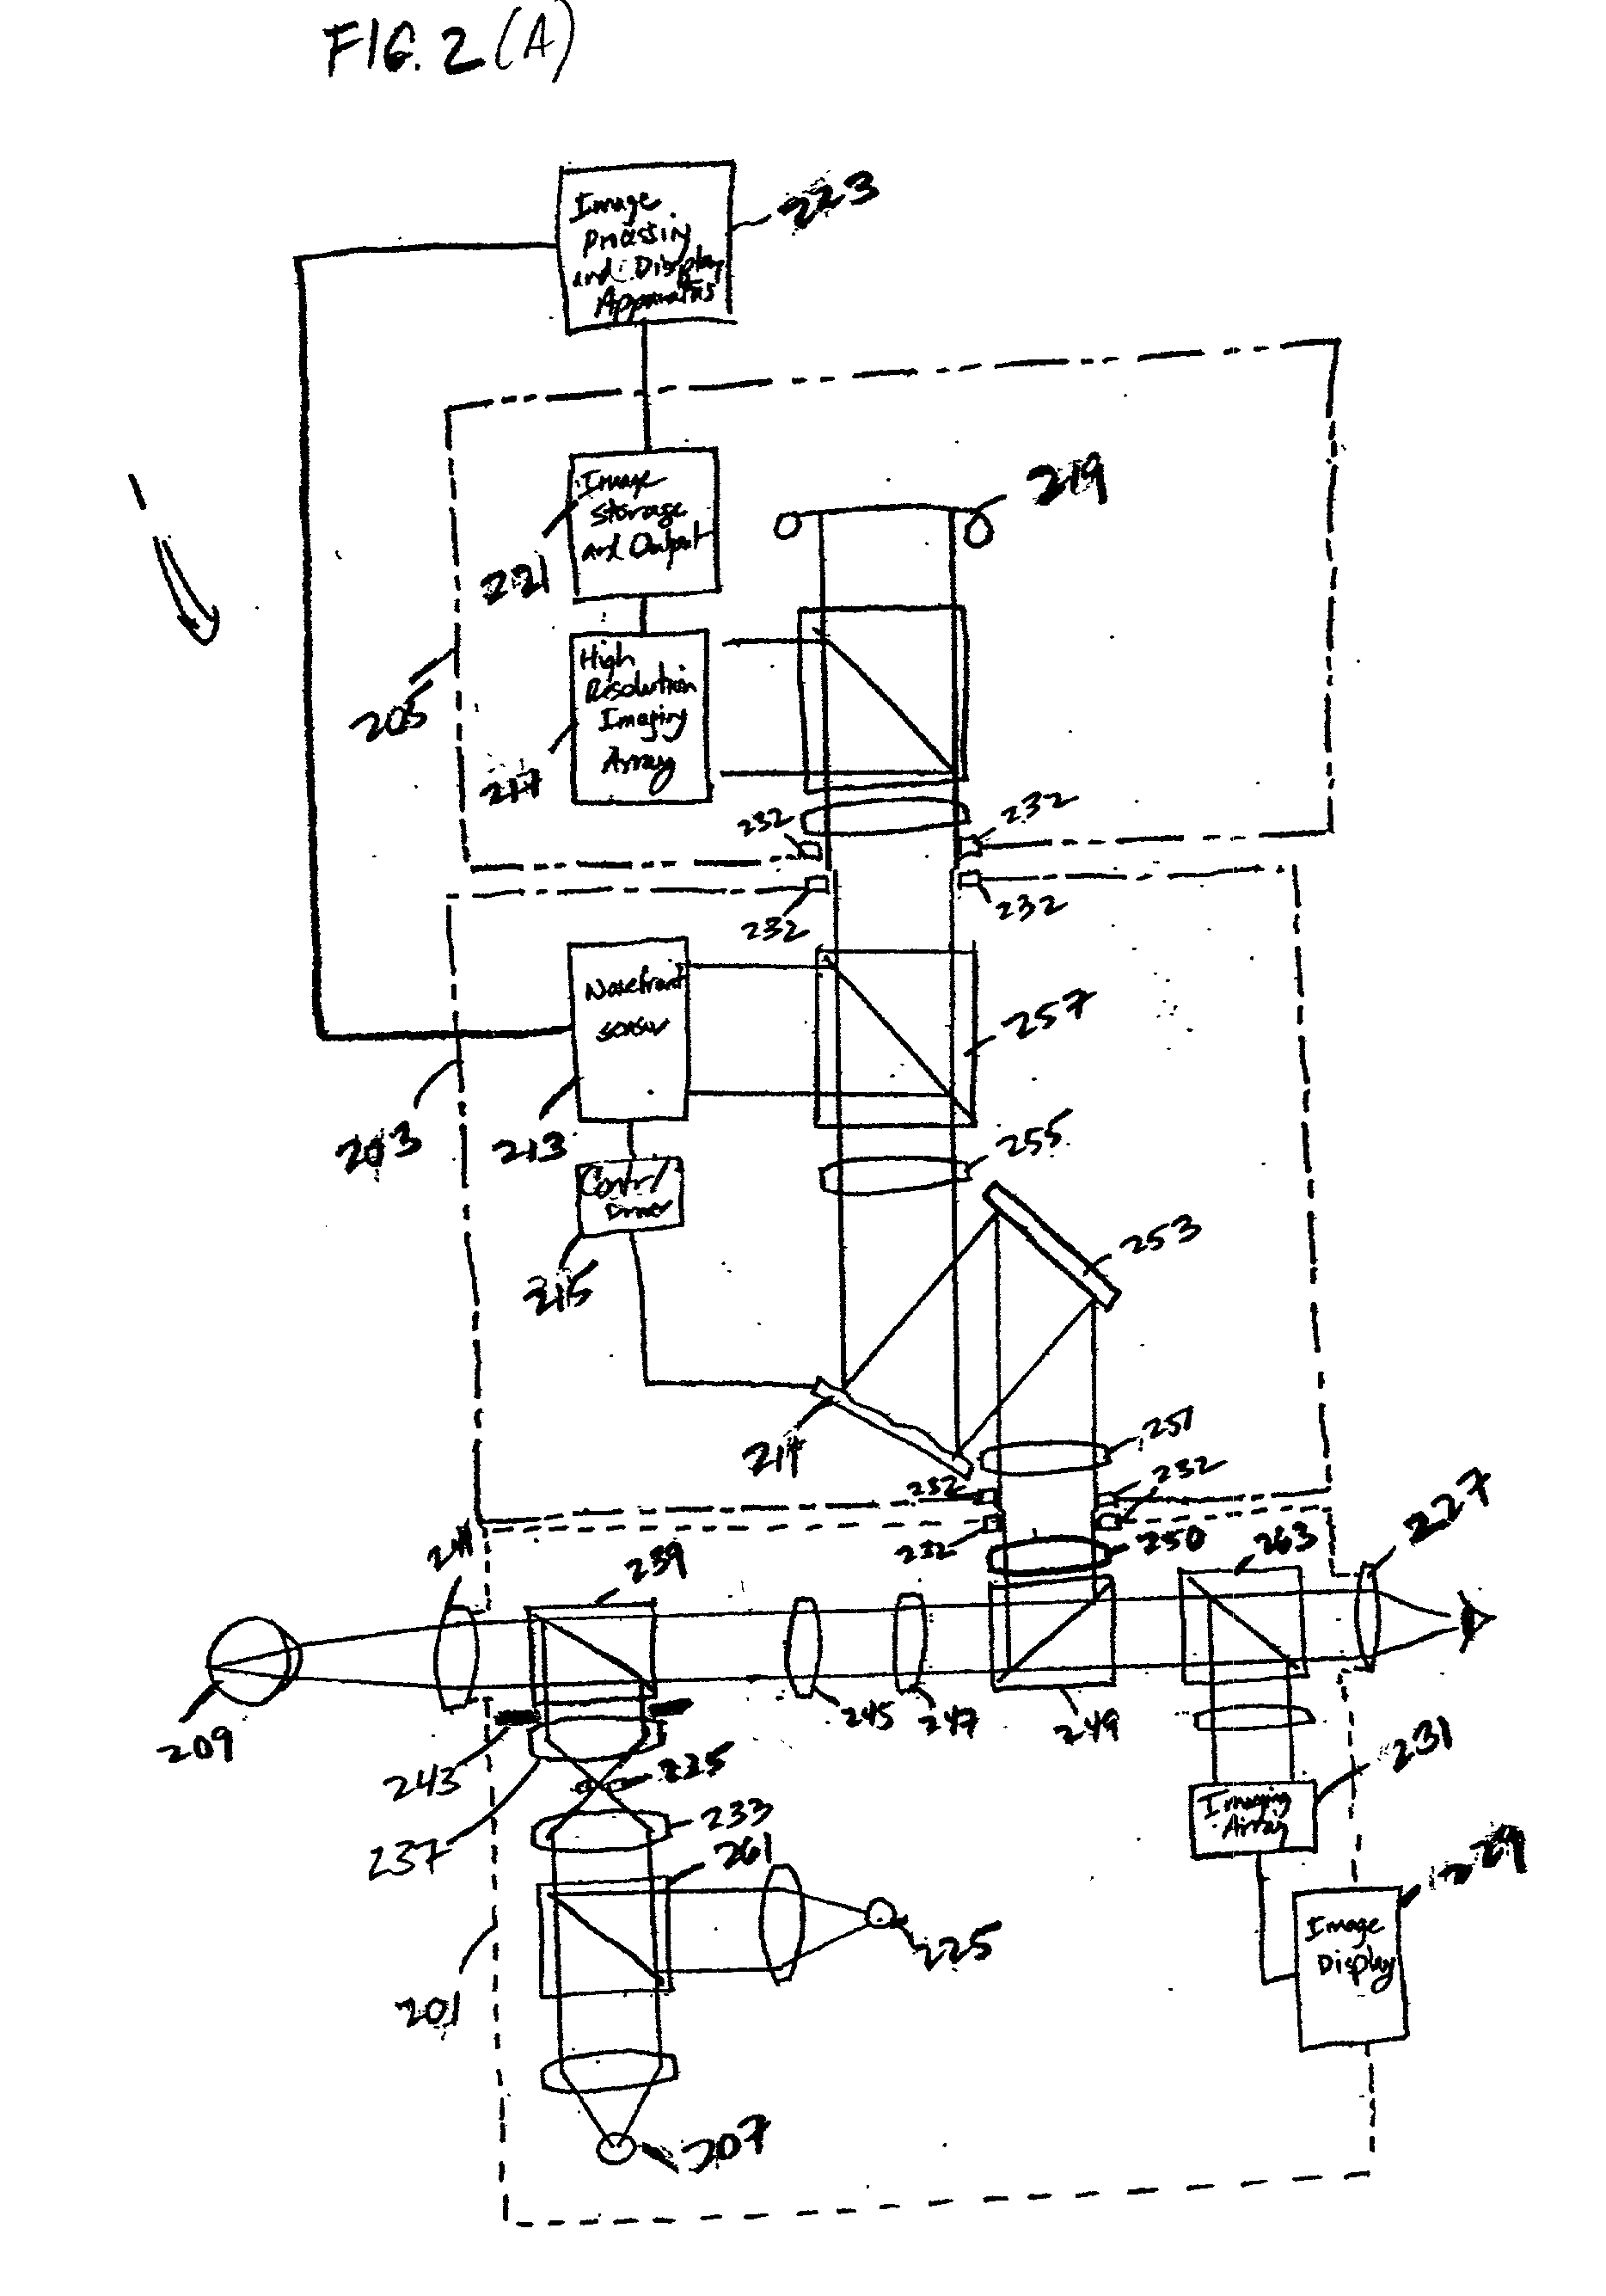 Modular adaptive optical subsystem for integration with a fundus camera body and CCD camera unit and improved fundus camera employing same